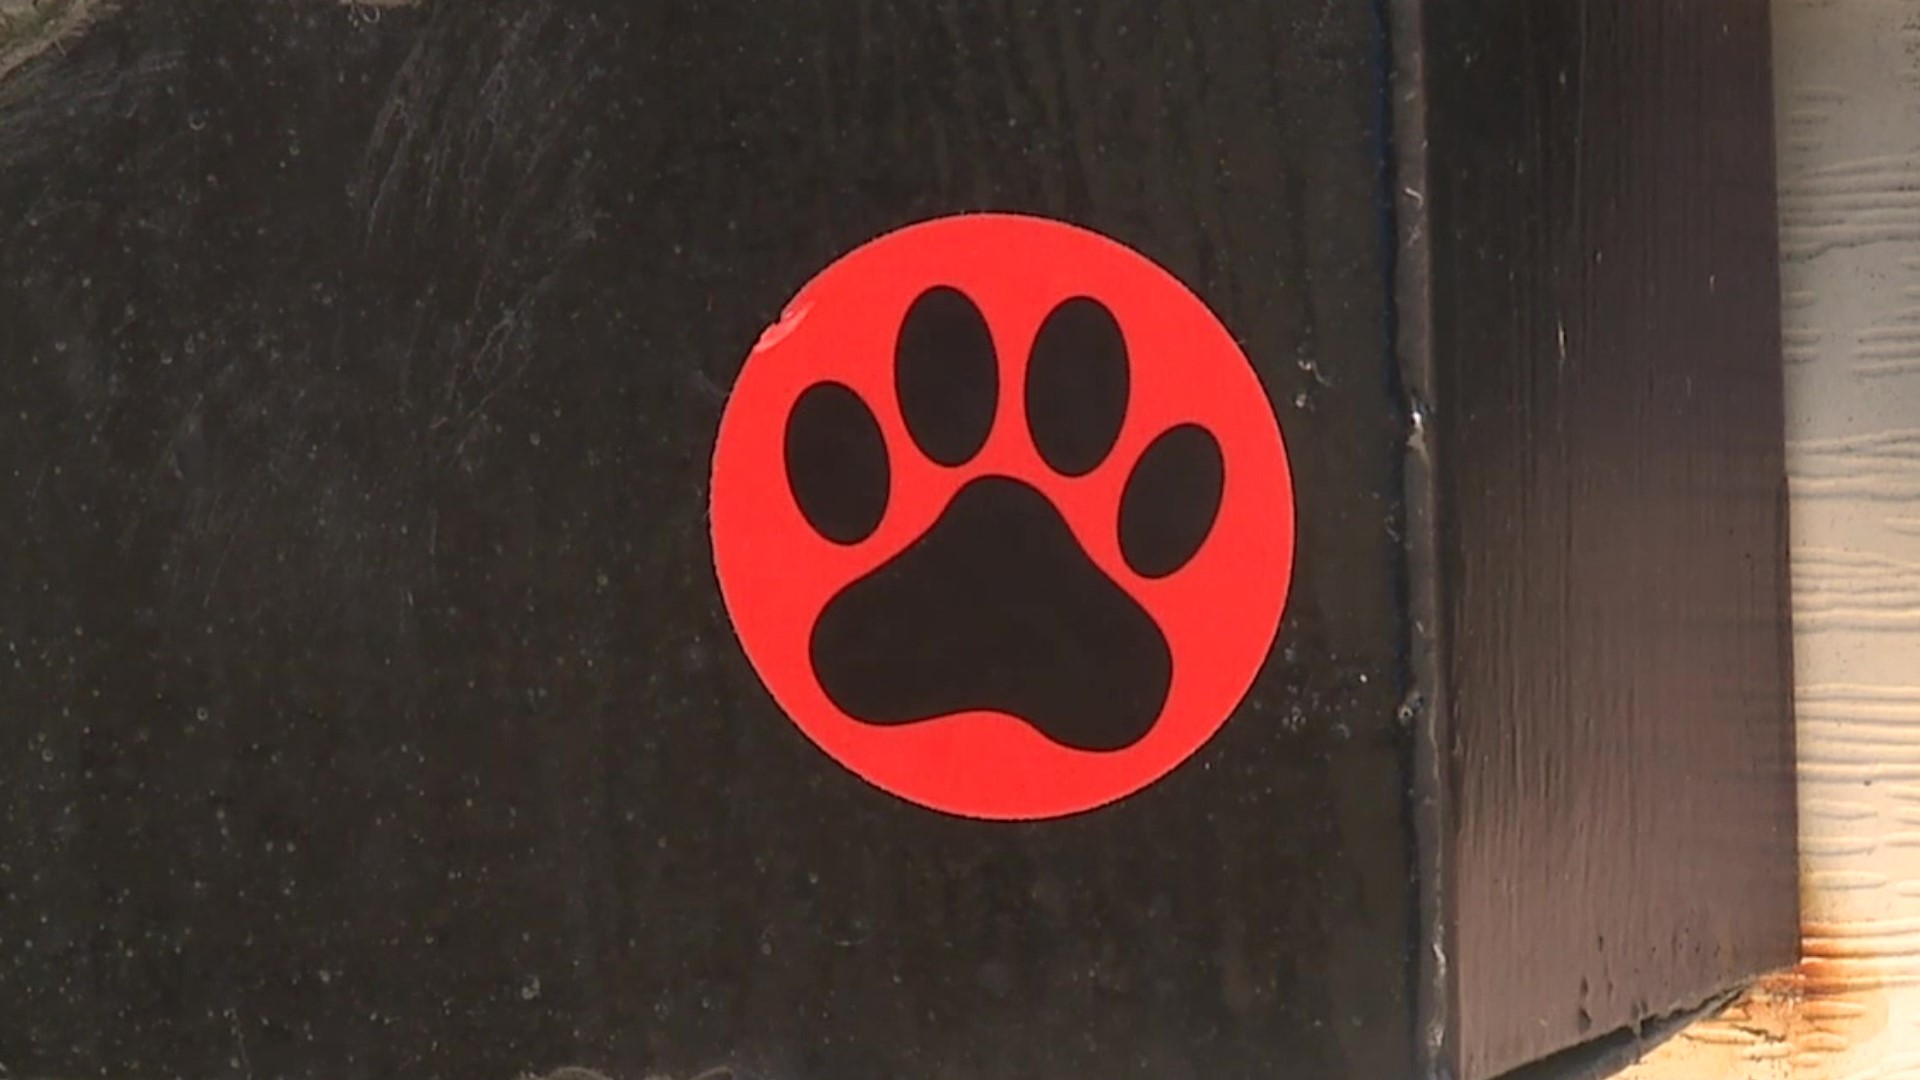 The postal service in Selinsgrove is placing paw print stickers on mailboxes of homes with dogs.